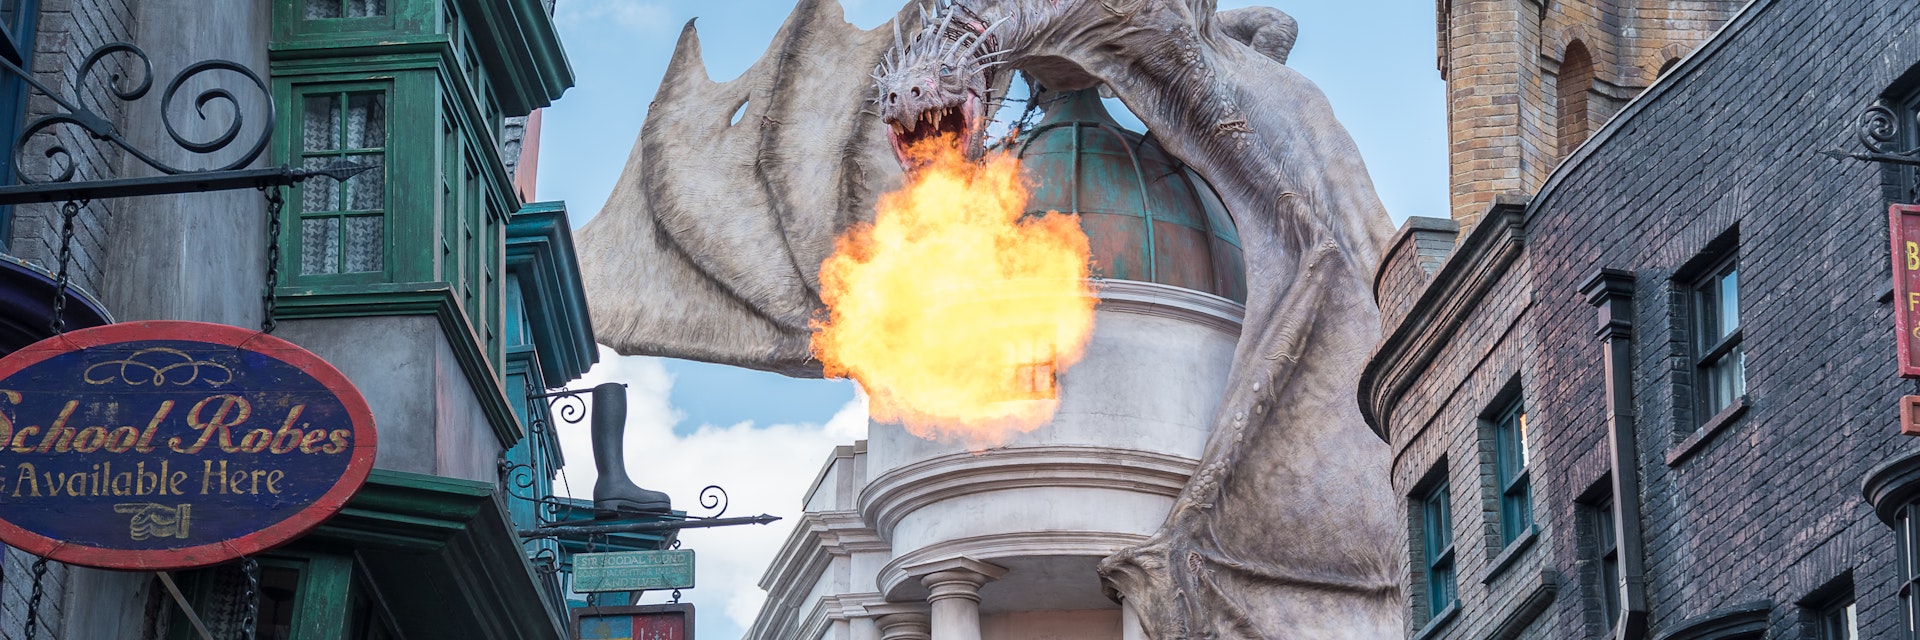 ORLANDO, USA - SEPTEMBER 02, 2015: Gringotts Bank Dragon breathing fire The Wizarding World Of Harry Potter at Universal Studios Orlando. Universal Studios Orlando is a theme park in Orlando, Florida.